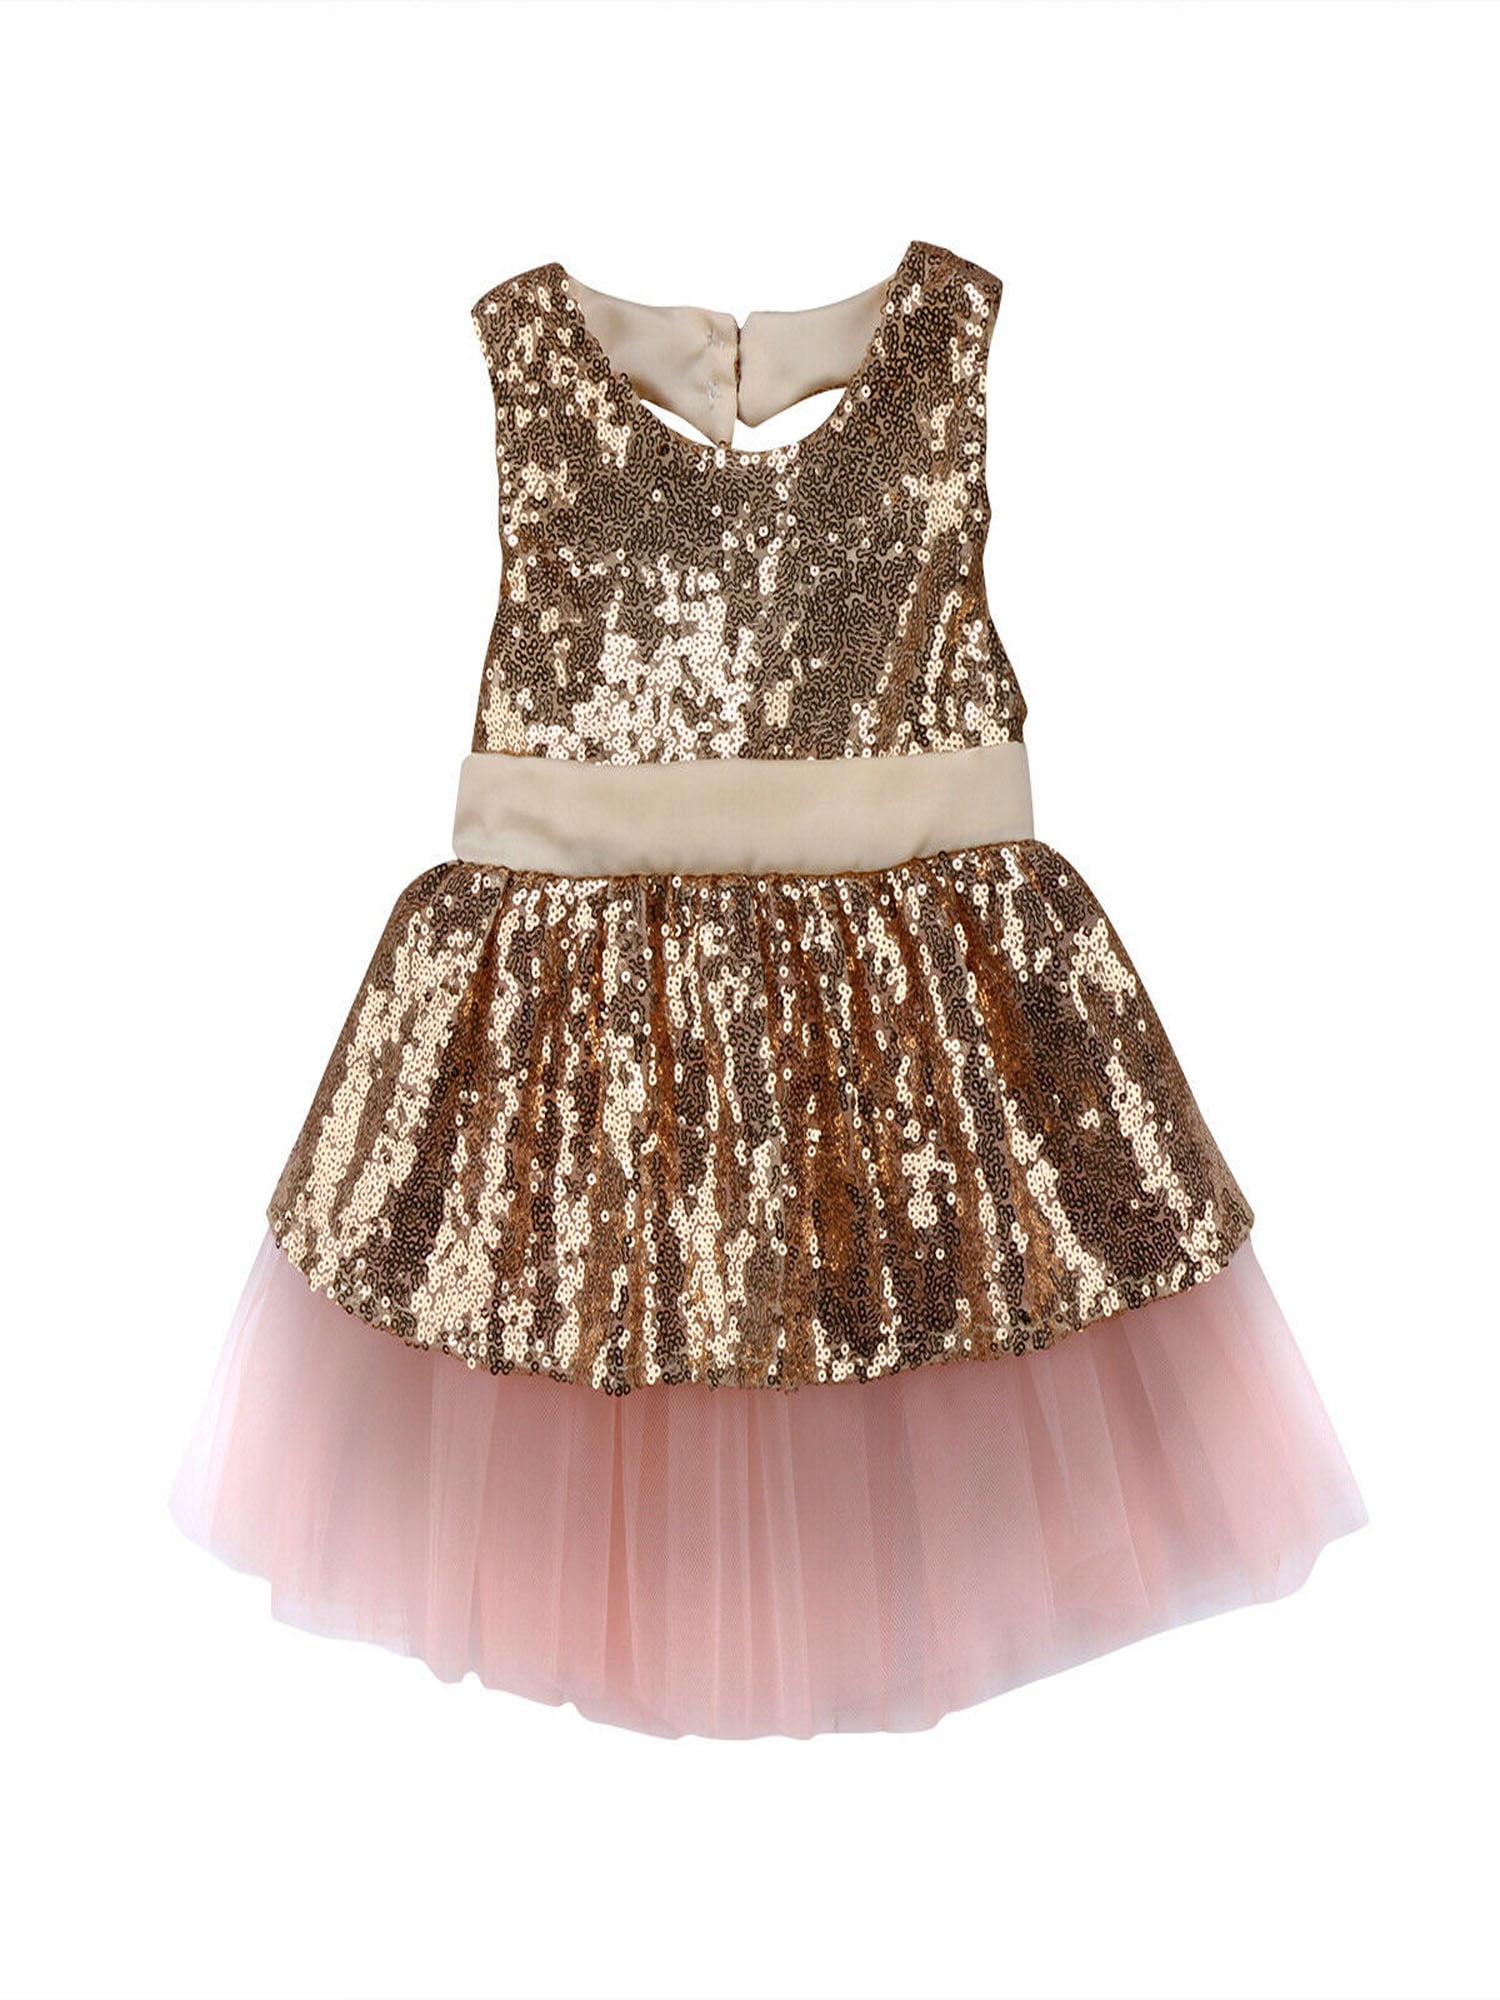 Oucan Summer Infant Baby Girls Sequin Bowknot Wedding Party Romper Princess Dress 